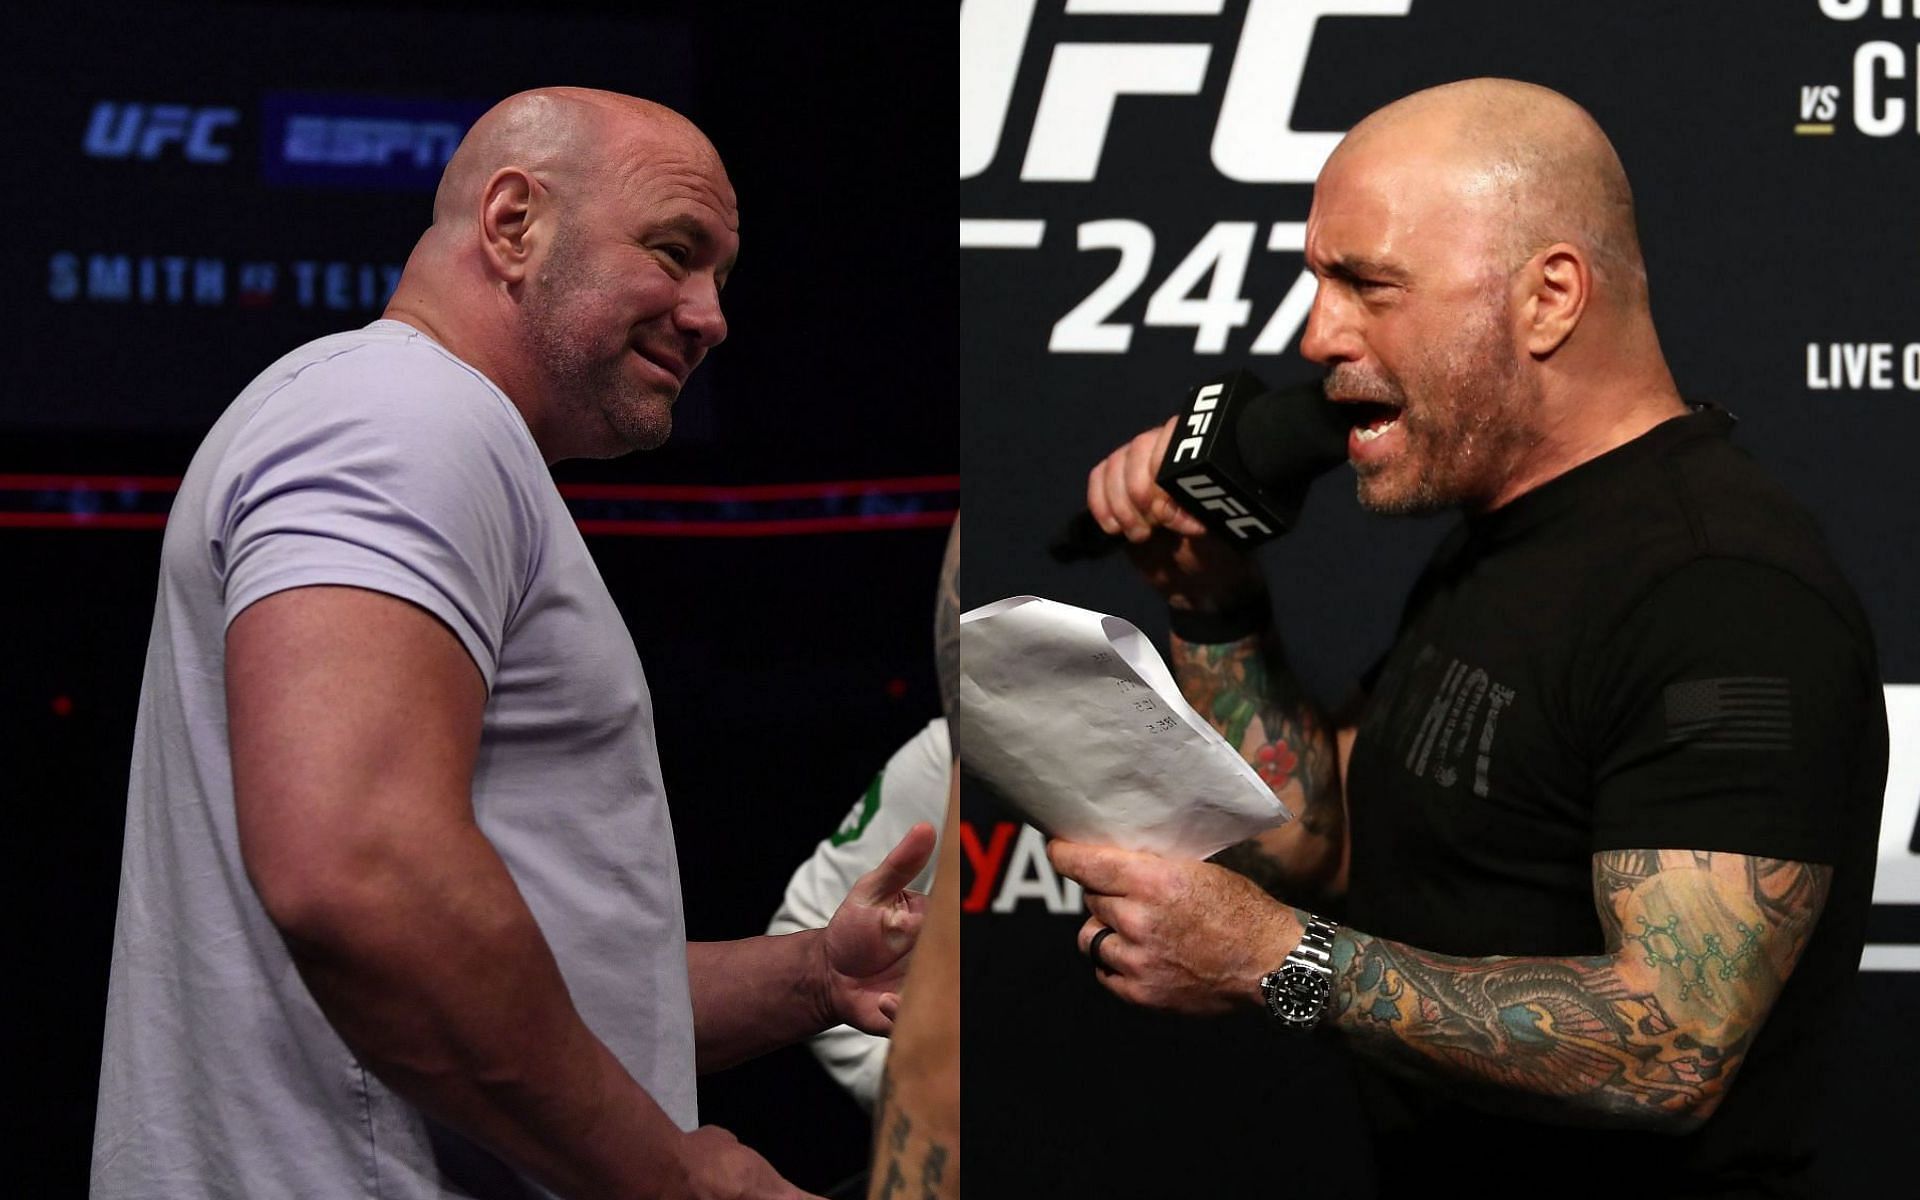 Dana White praises Joe Rogan as being one of the most passionate commentators in mixed martial arts